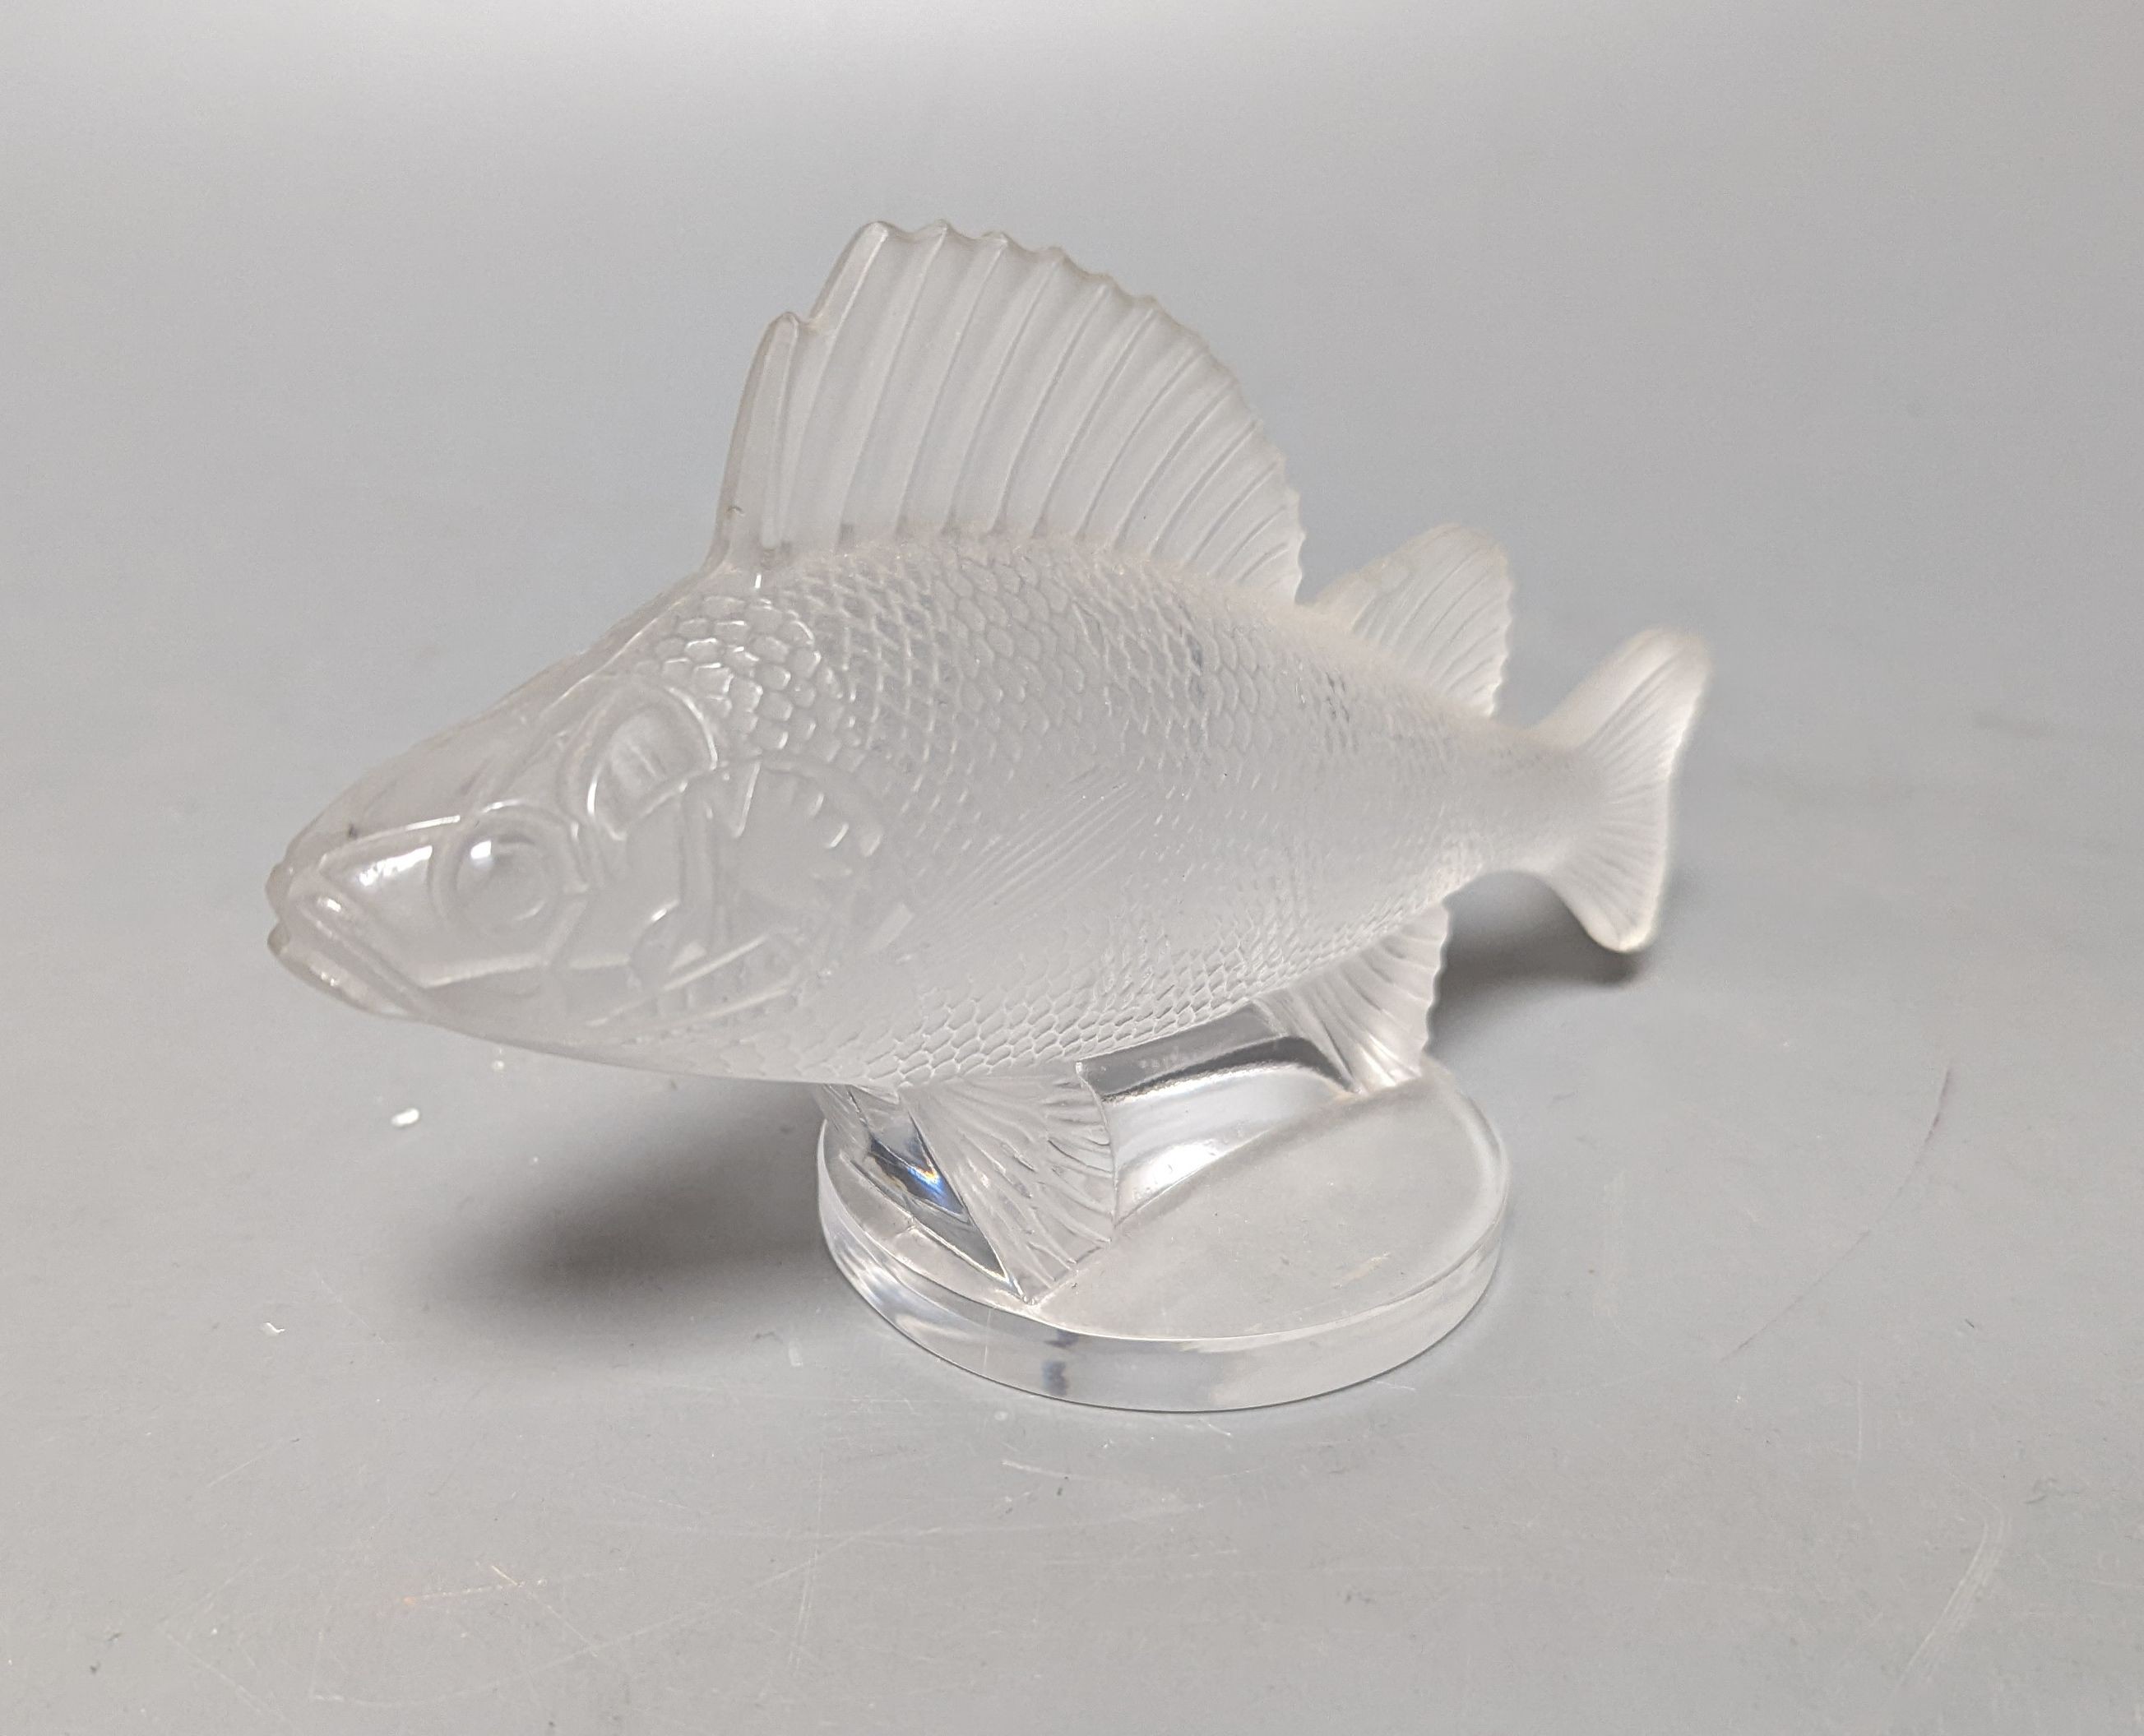 A Lalique clear and frosted glass Perche Poisson / Perch Fish car mascot, engraved mark Lalique France, 6cm long